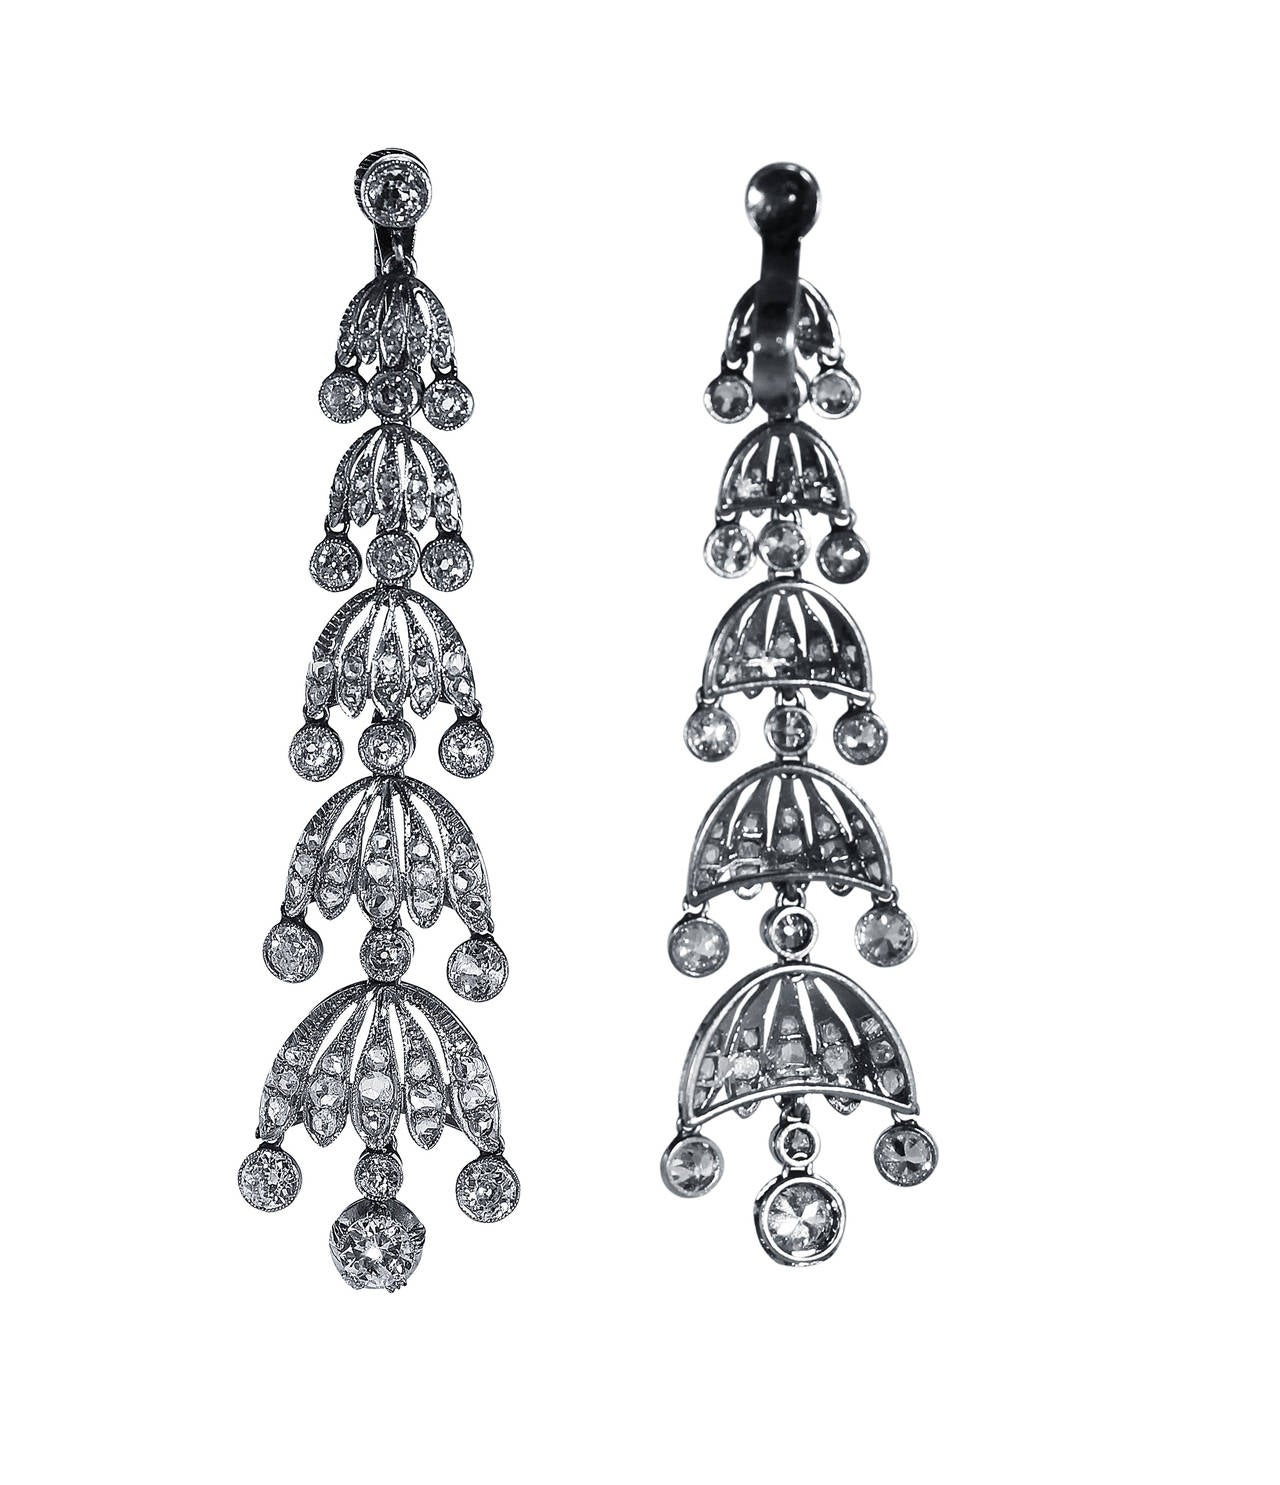 A pair of early 20th century platinum and diamond pendant-earclips, designed as graduated chandeliers set throughout with 34 old European-cut diamonds weighing approximately 5.50 carats, accented by 116 rose-cut diamonds weighing approximately 1.50